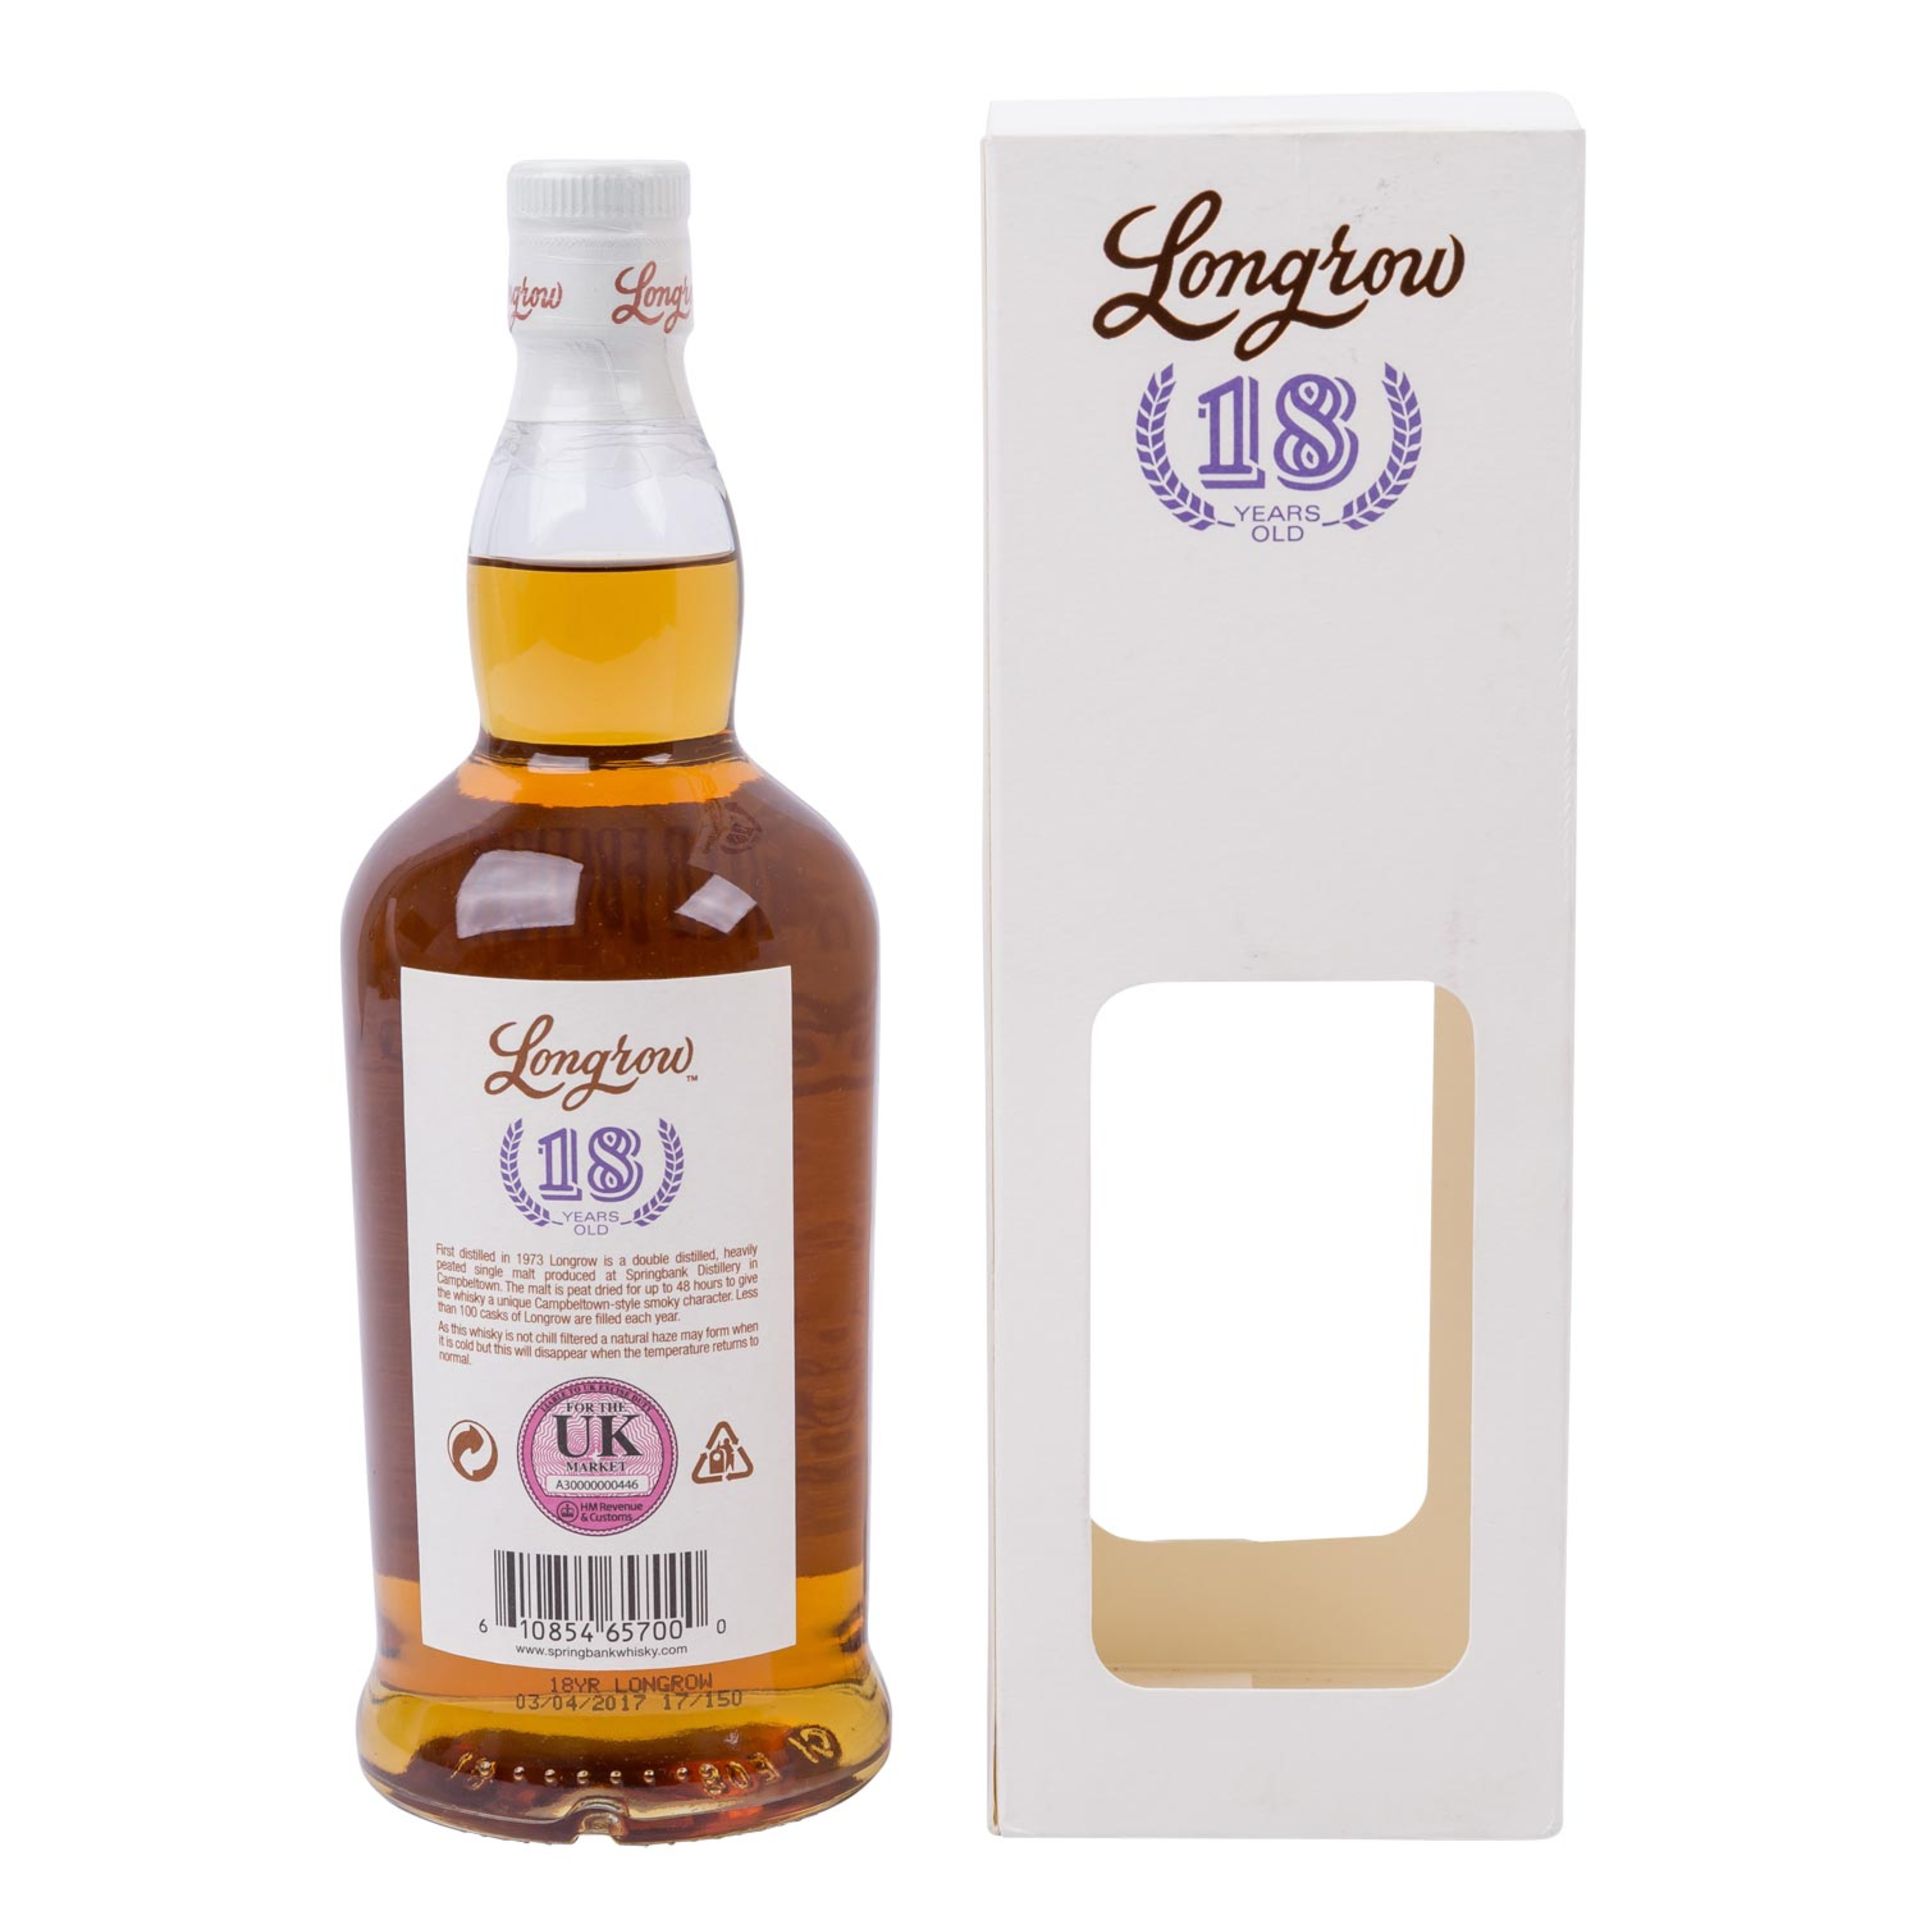 LONGROW Limited Edition Campbeltown Single Malt Scotch Whisky '18 Years old' - Image 2 of 3